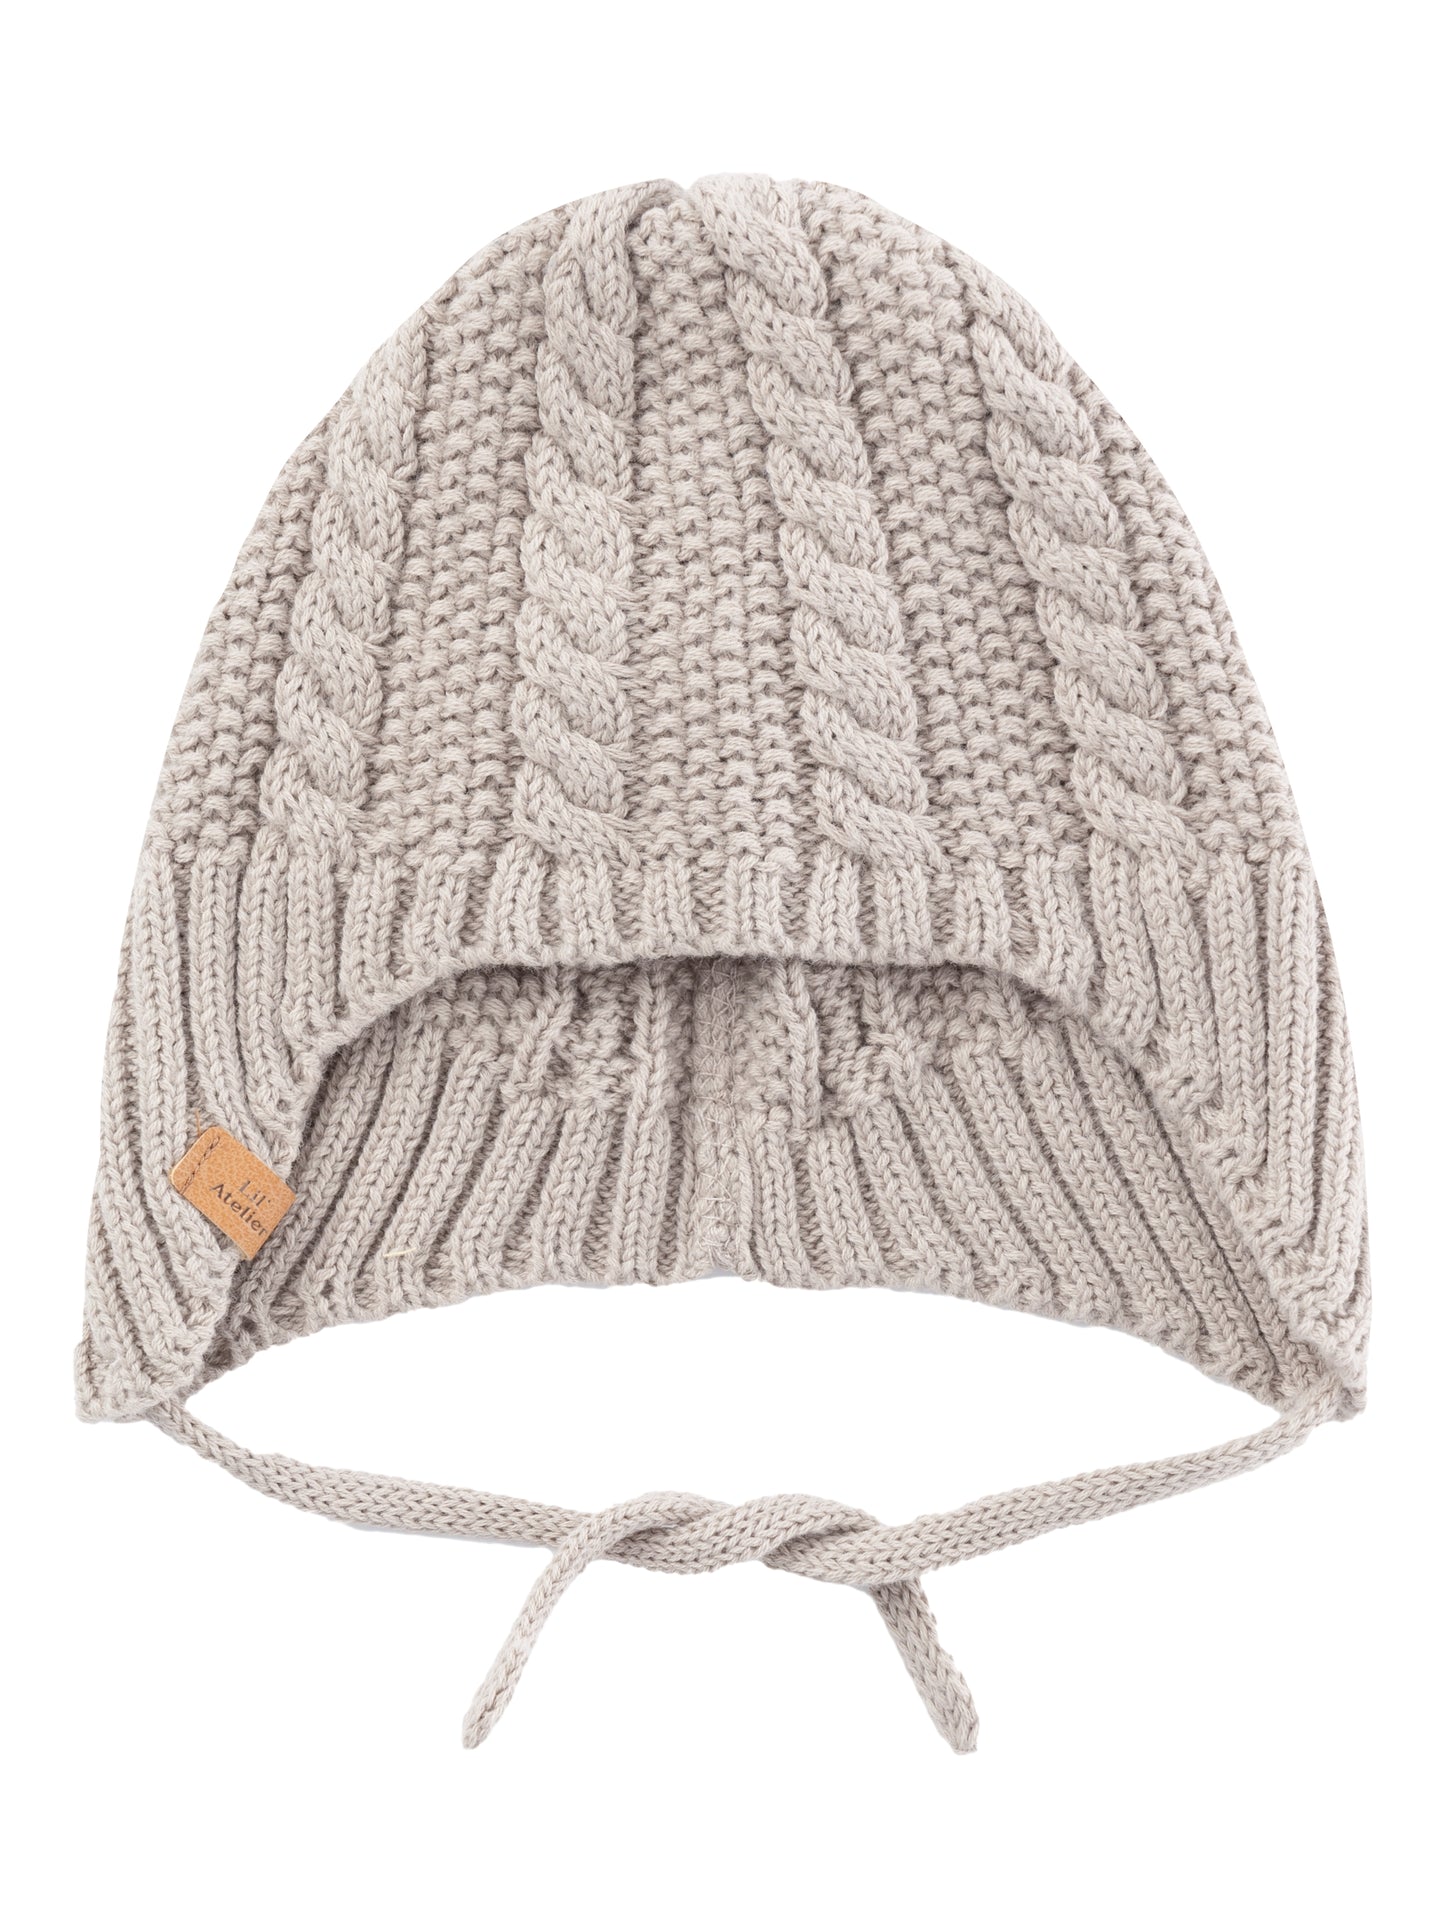 Lil atelier Baby | Daio Knit Hat